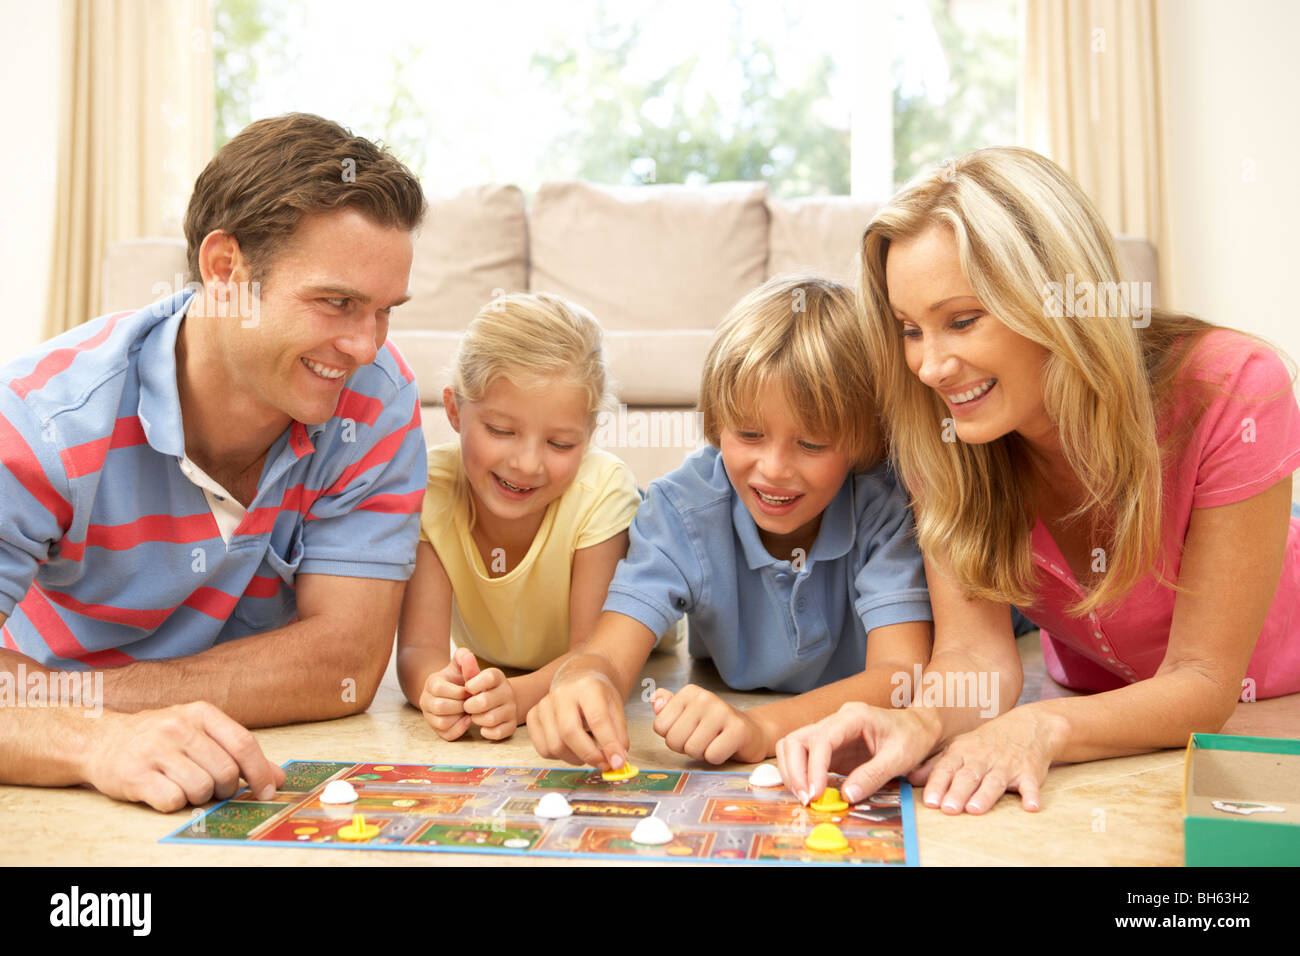 Family Playing Board Game At Home Stock Photo